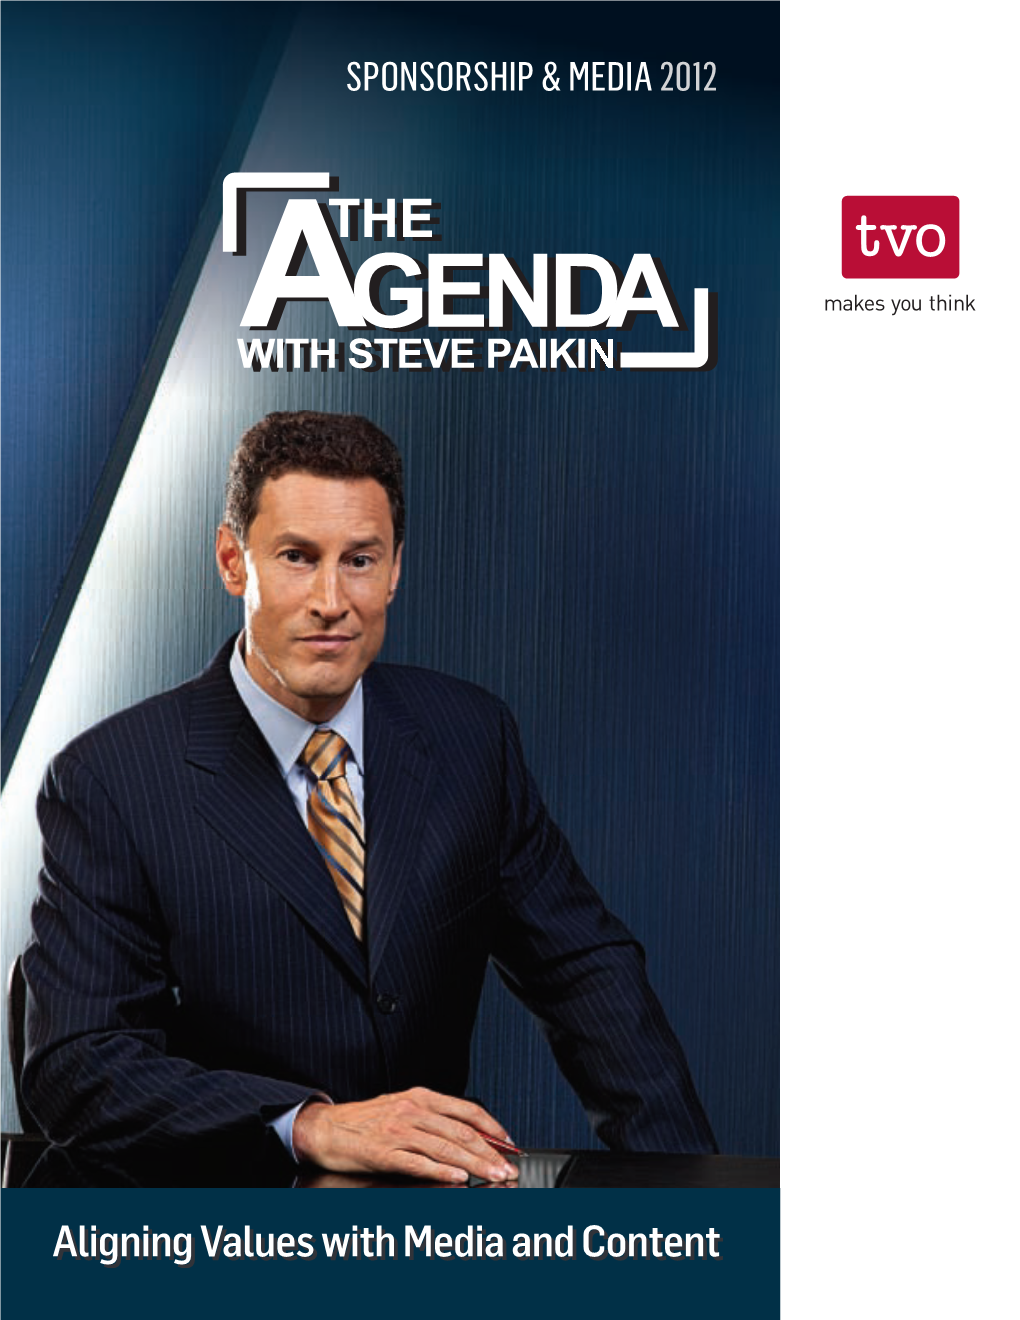 The Agenda with Steve Paikin with Top and Tail Sponsor Brand Commercial Messages and Tagged Promotional Spots Airing in Our Prime Time Schedule